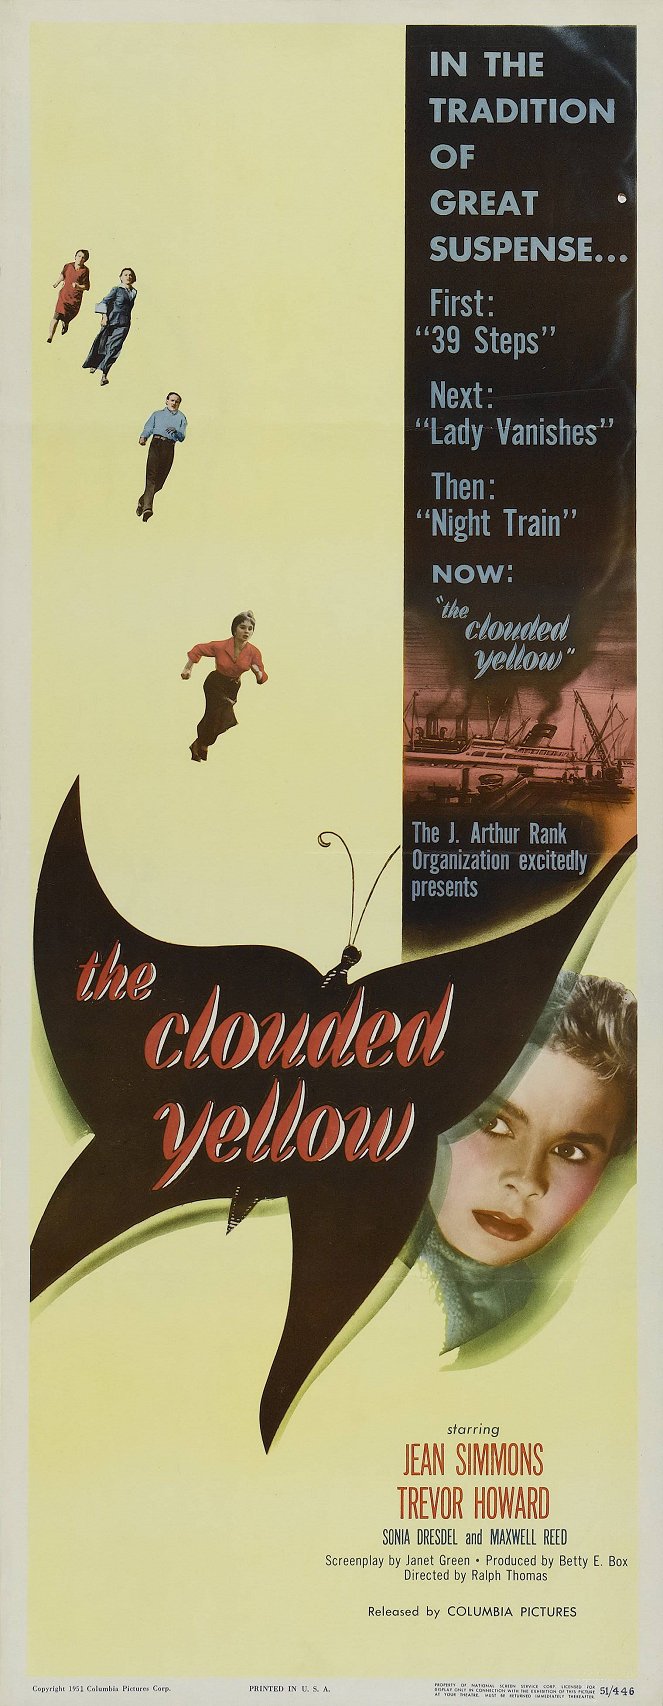 The Clouded Yellow - Posters